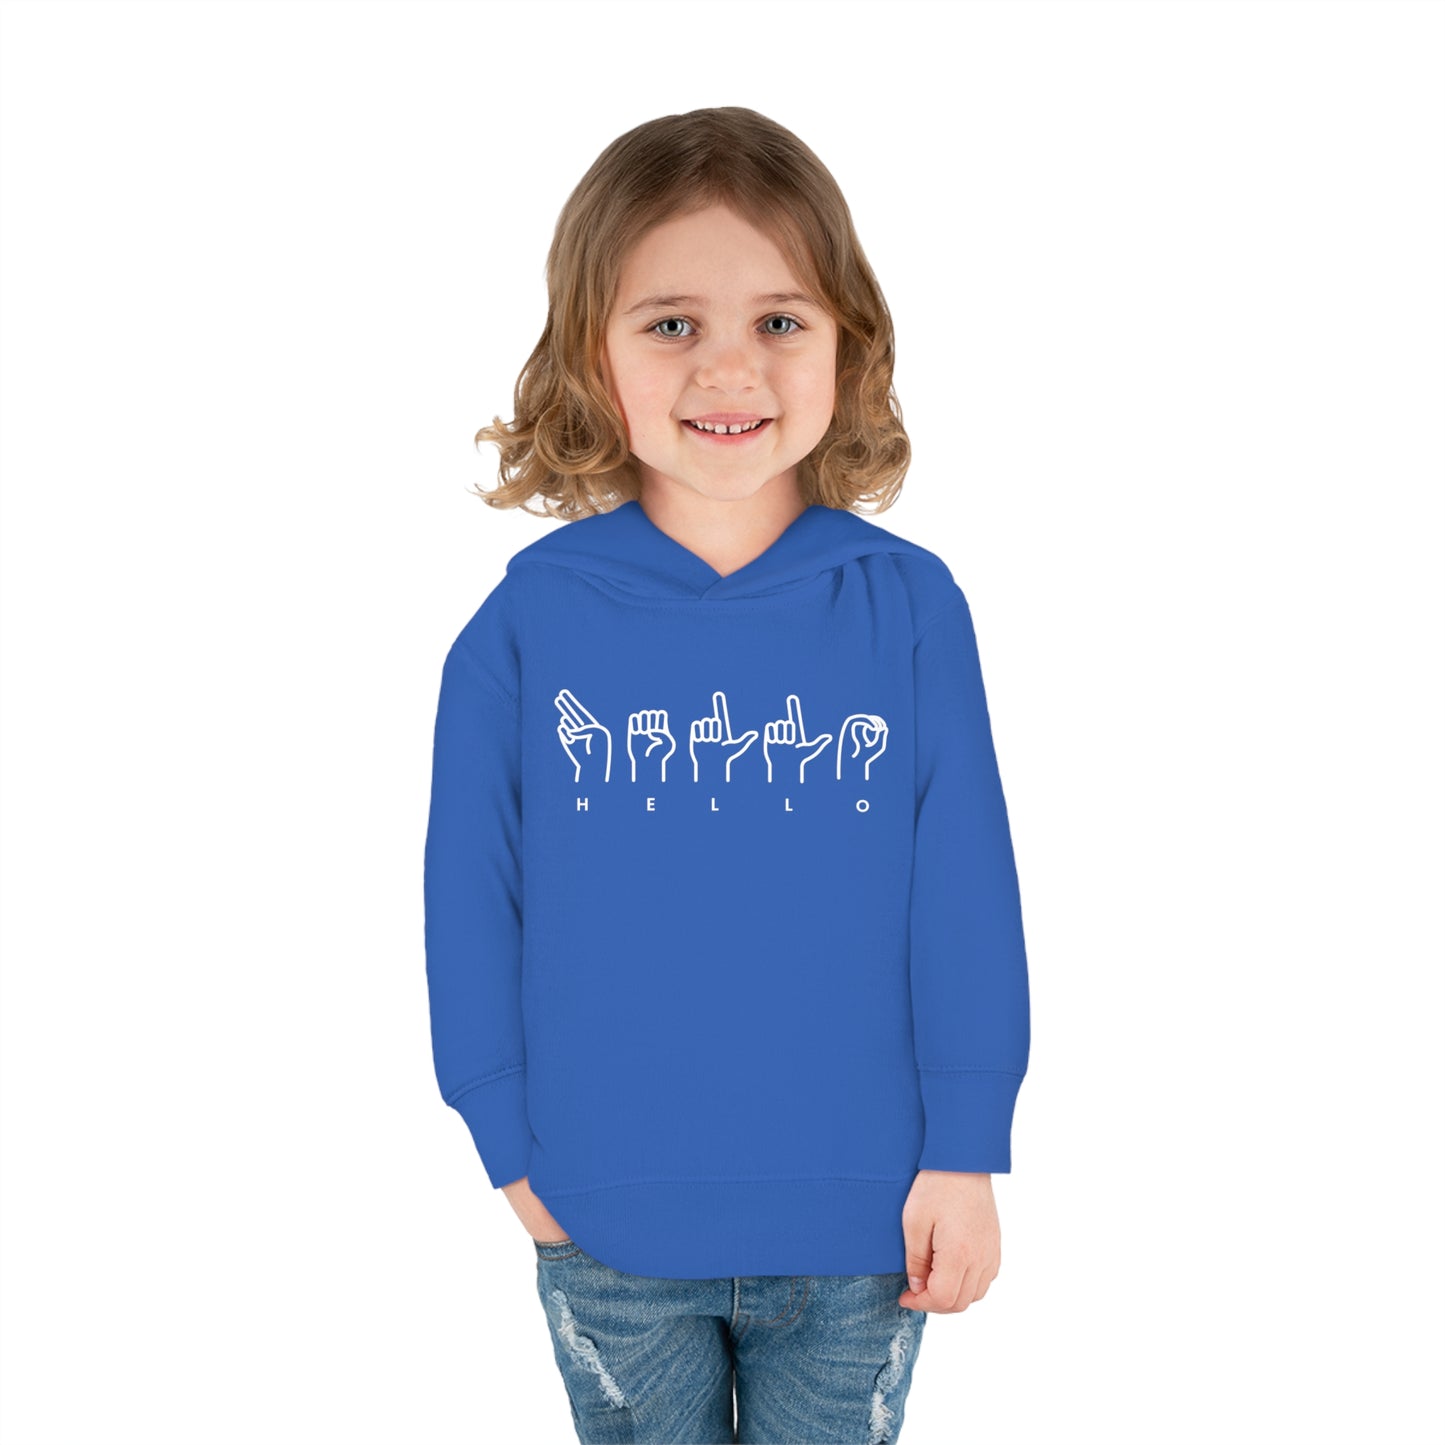 Toddler HELLO Hoodie